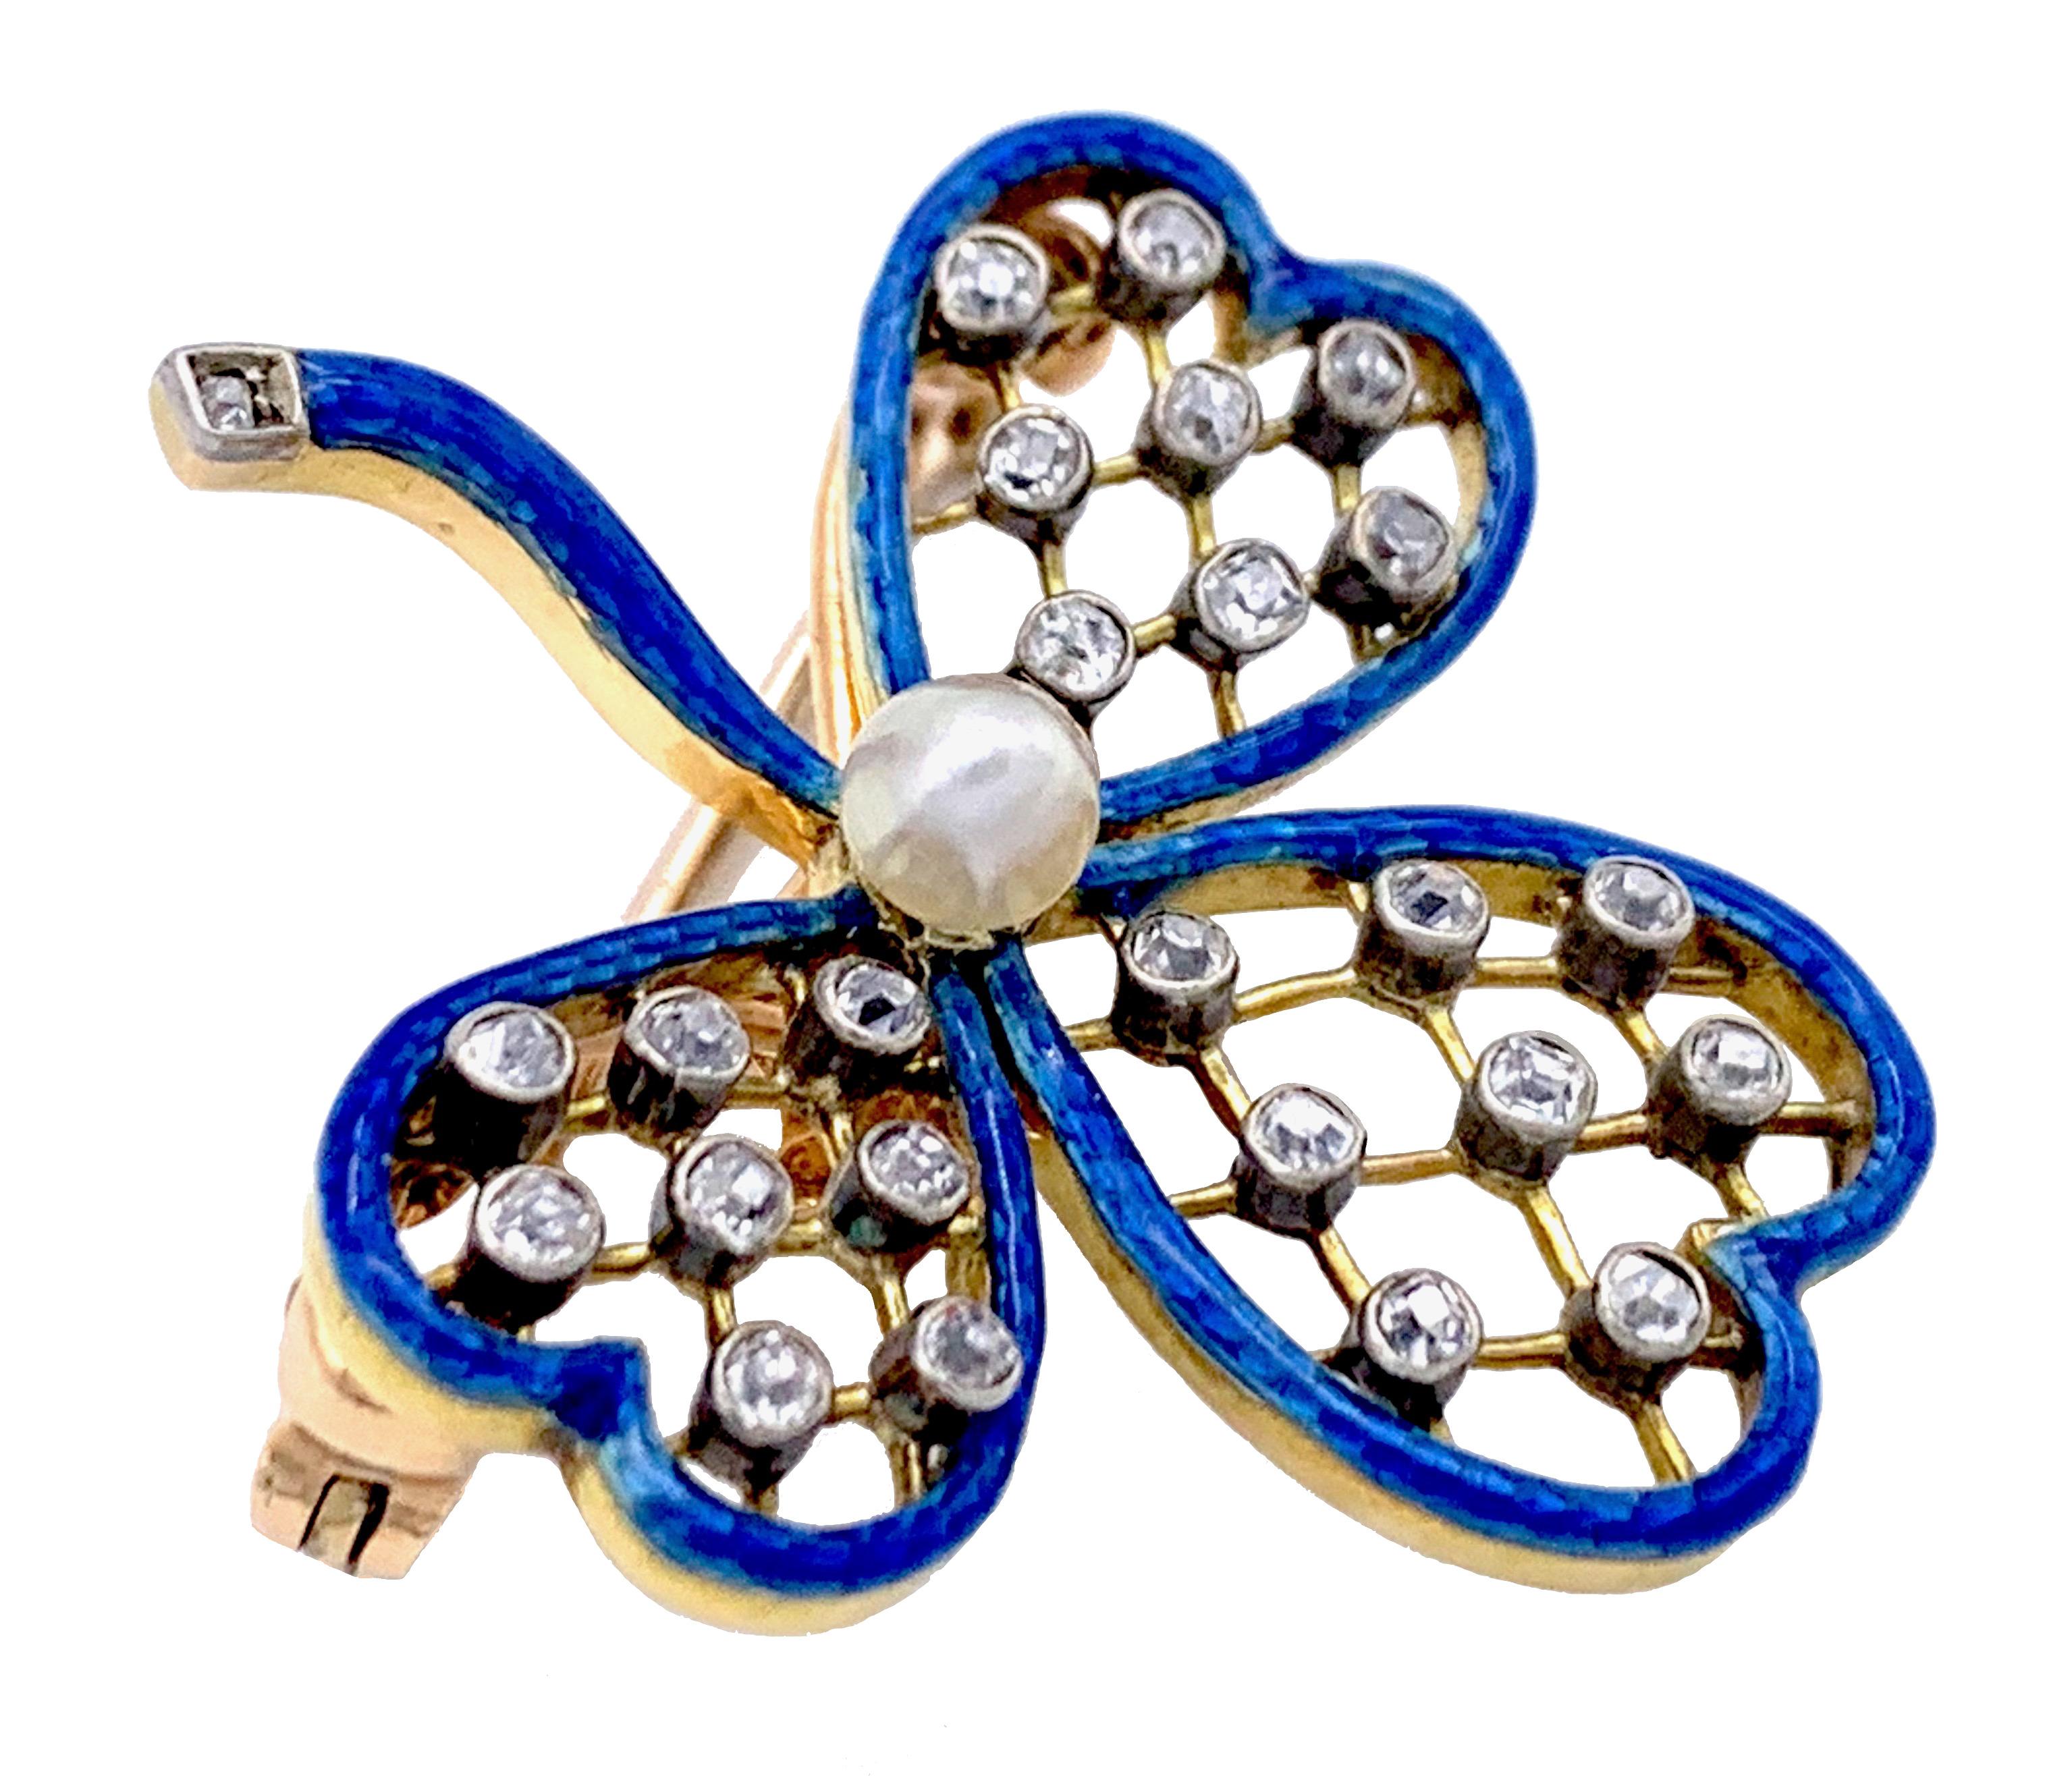 This beautiful and delicate clover jewel comes in it's original fitted leather case, it has been crafted in England by Collingwood & Co around 1900. The elegant piece of jewellery has a detachable brooch fitting that can also be worn as a